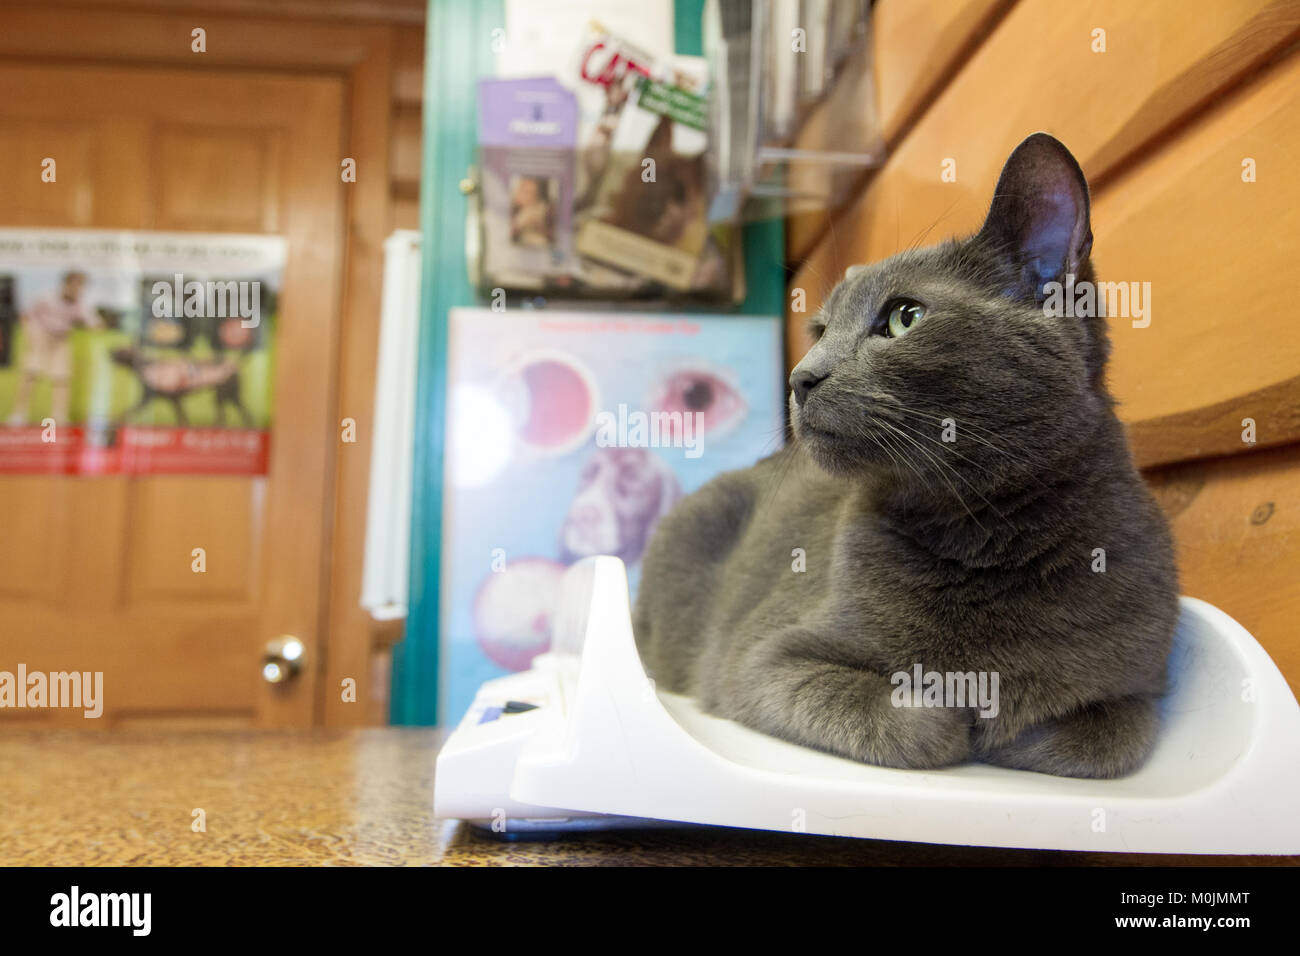 A grey cat sits on the table scale during a visit to the vets office Stock Photo